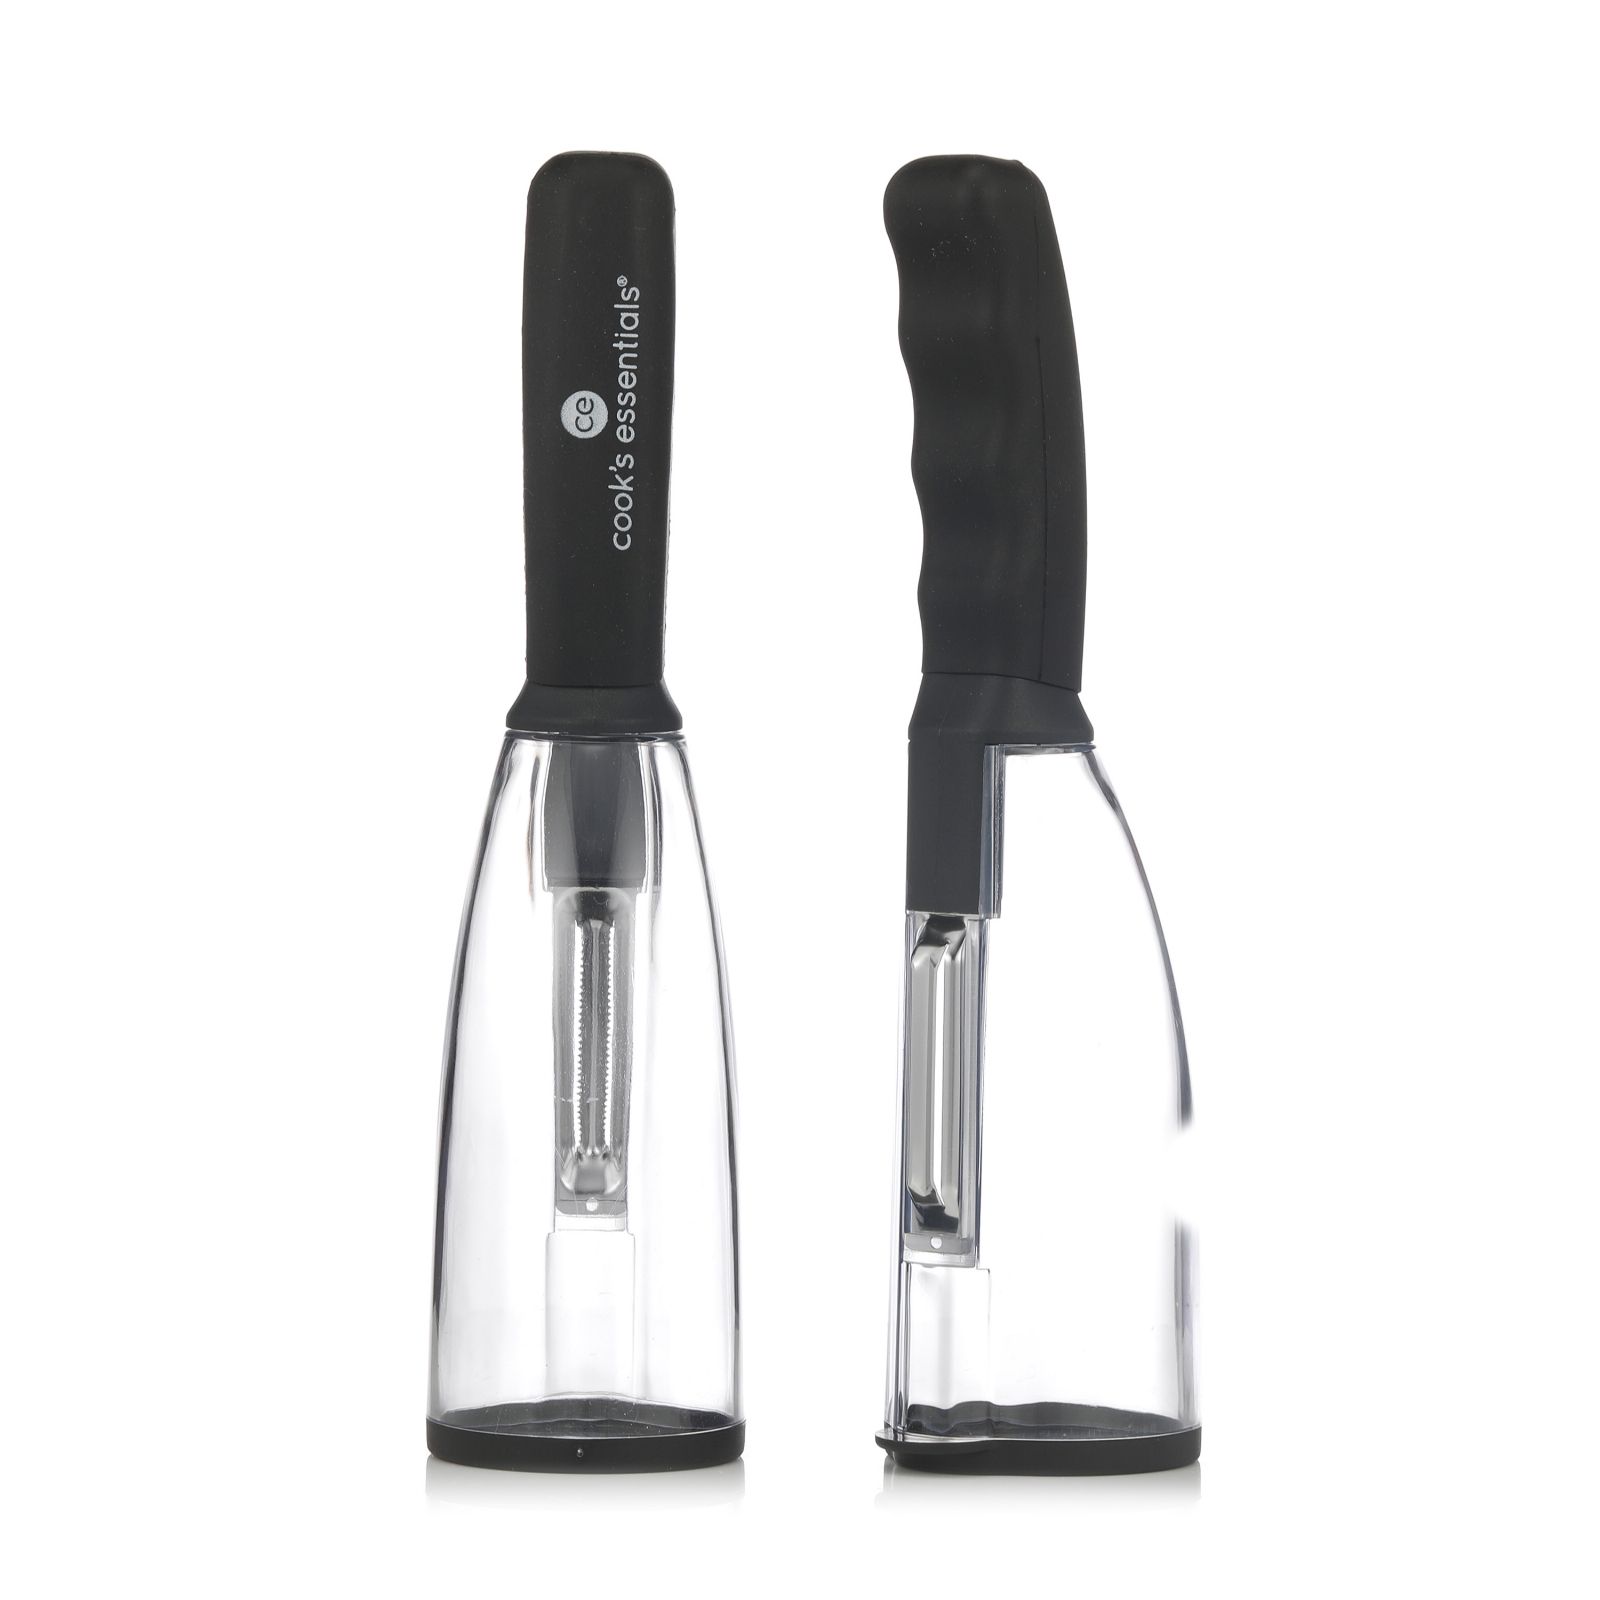 EGGEIL vegetable peeler with container,Set of 2 peelers with